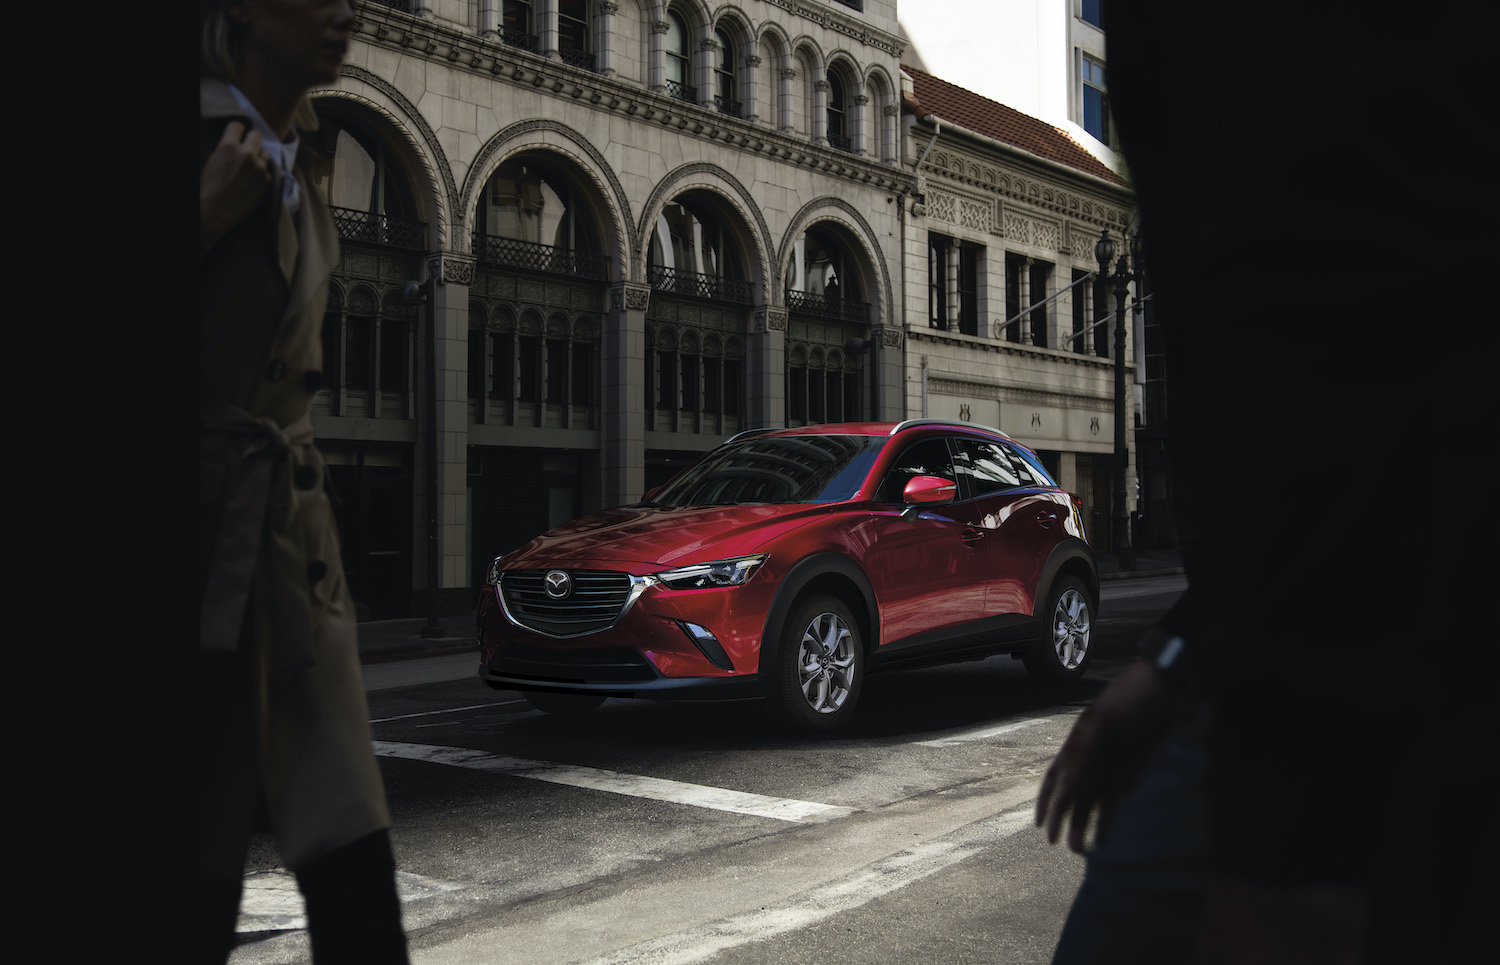 2021 Mazda CX-3 parked in a city setting